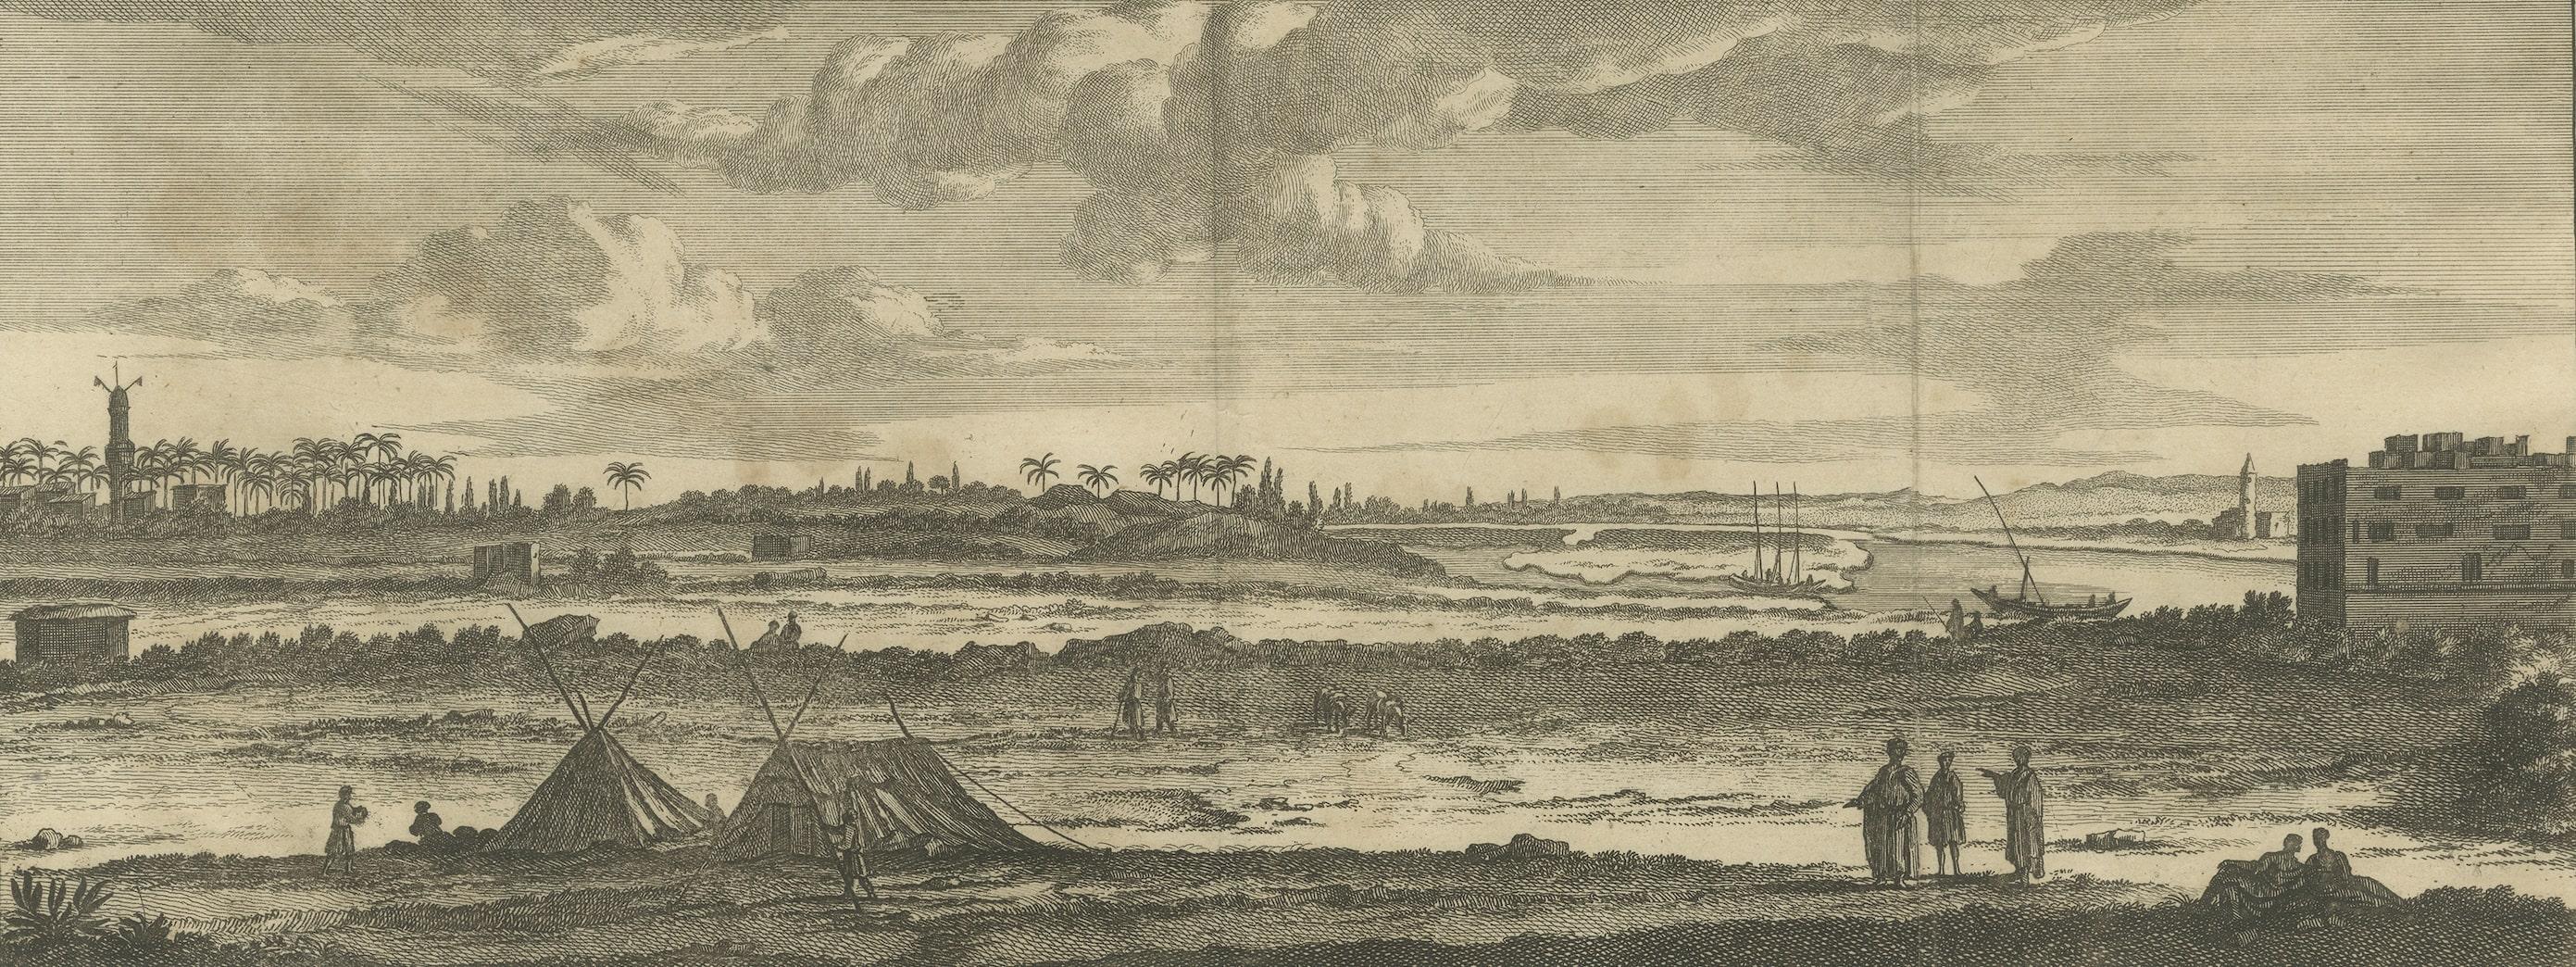 Antique print with views of the Nile, Egypt. Below near Damietta. Published by C. de Bruijn, circa 1700.

Cornelis de Bruijn (also spelled Cornelius de Bruyn, pronounced (1652 – 1726/7) was a Dutch artist and traveler. He made two large tours and